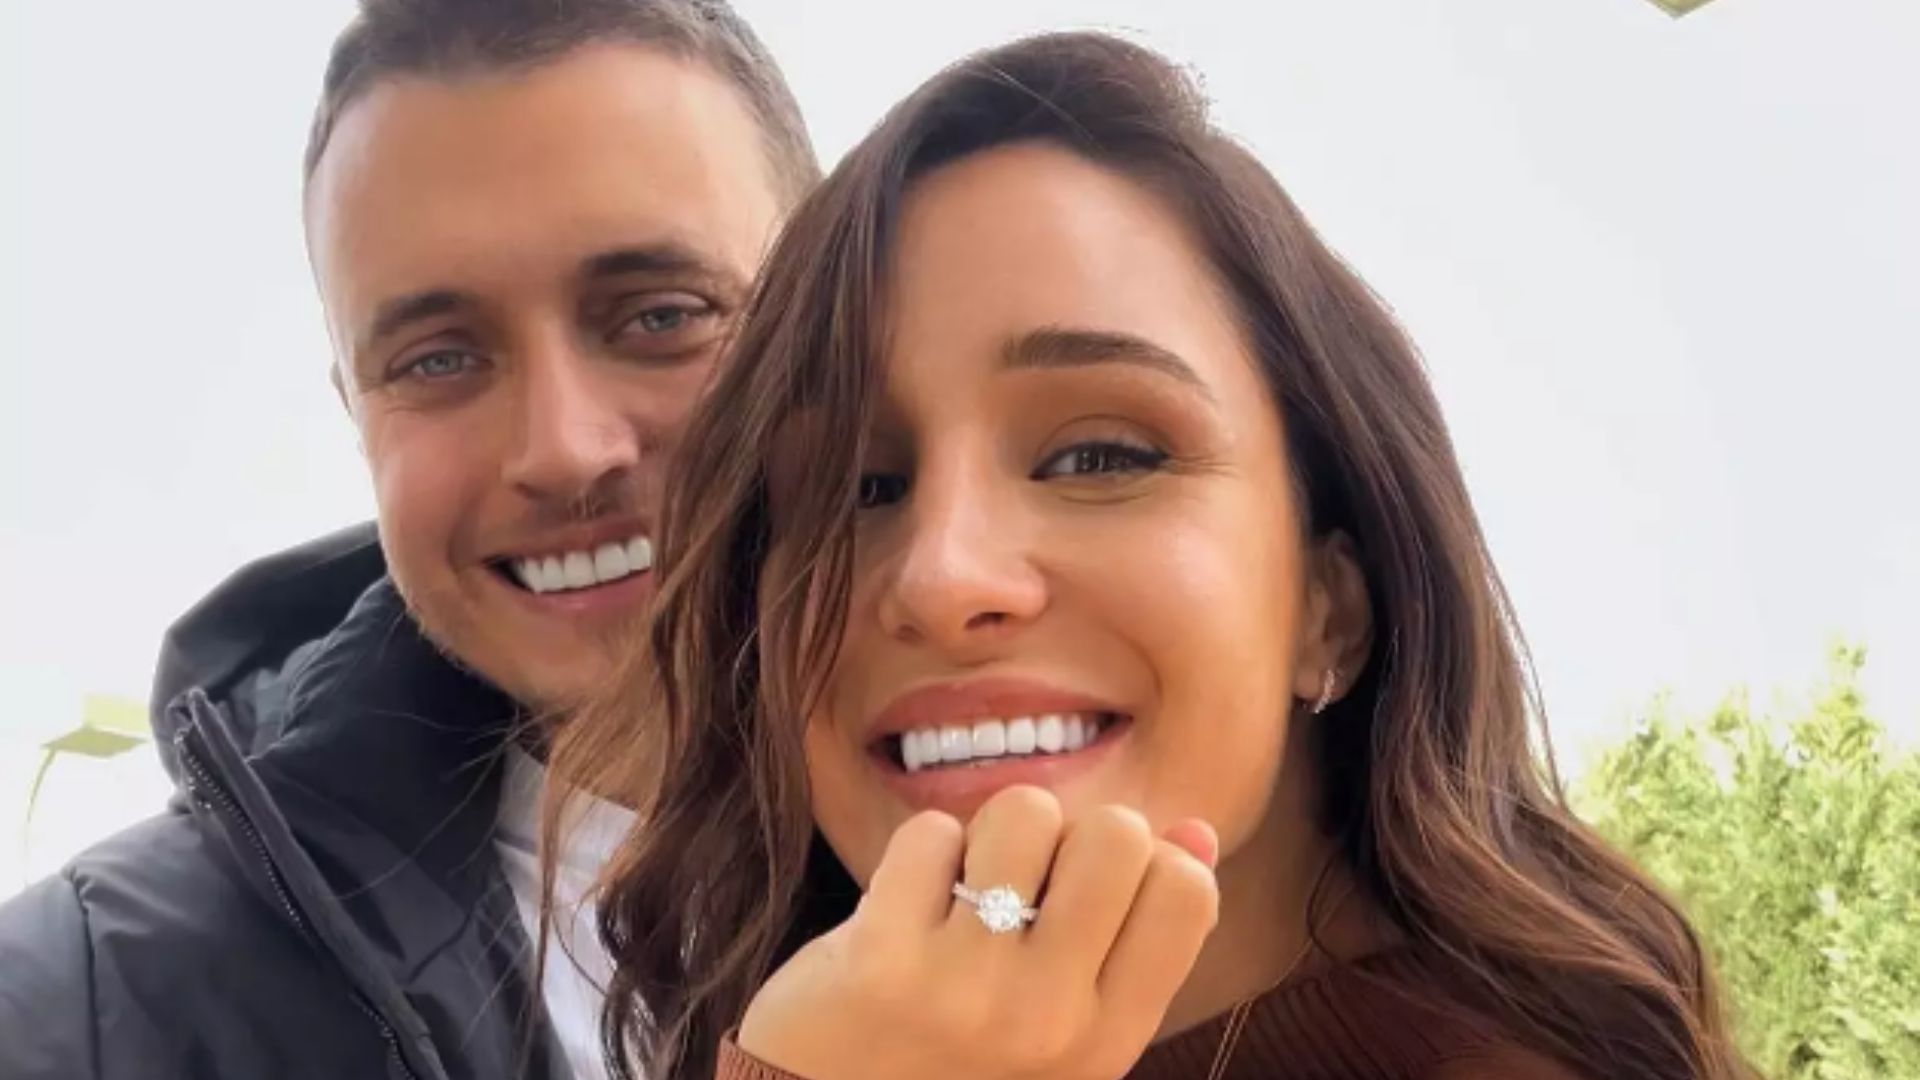 Kayla Itsines Is Engaged to Jae Woodroffe 6 Months Announcing Romance